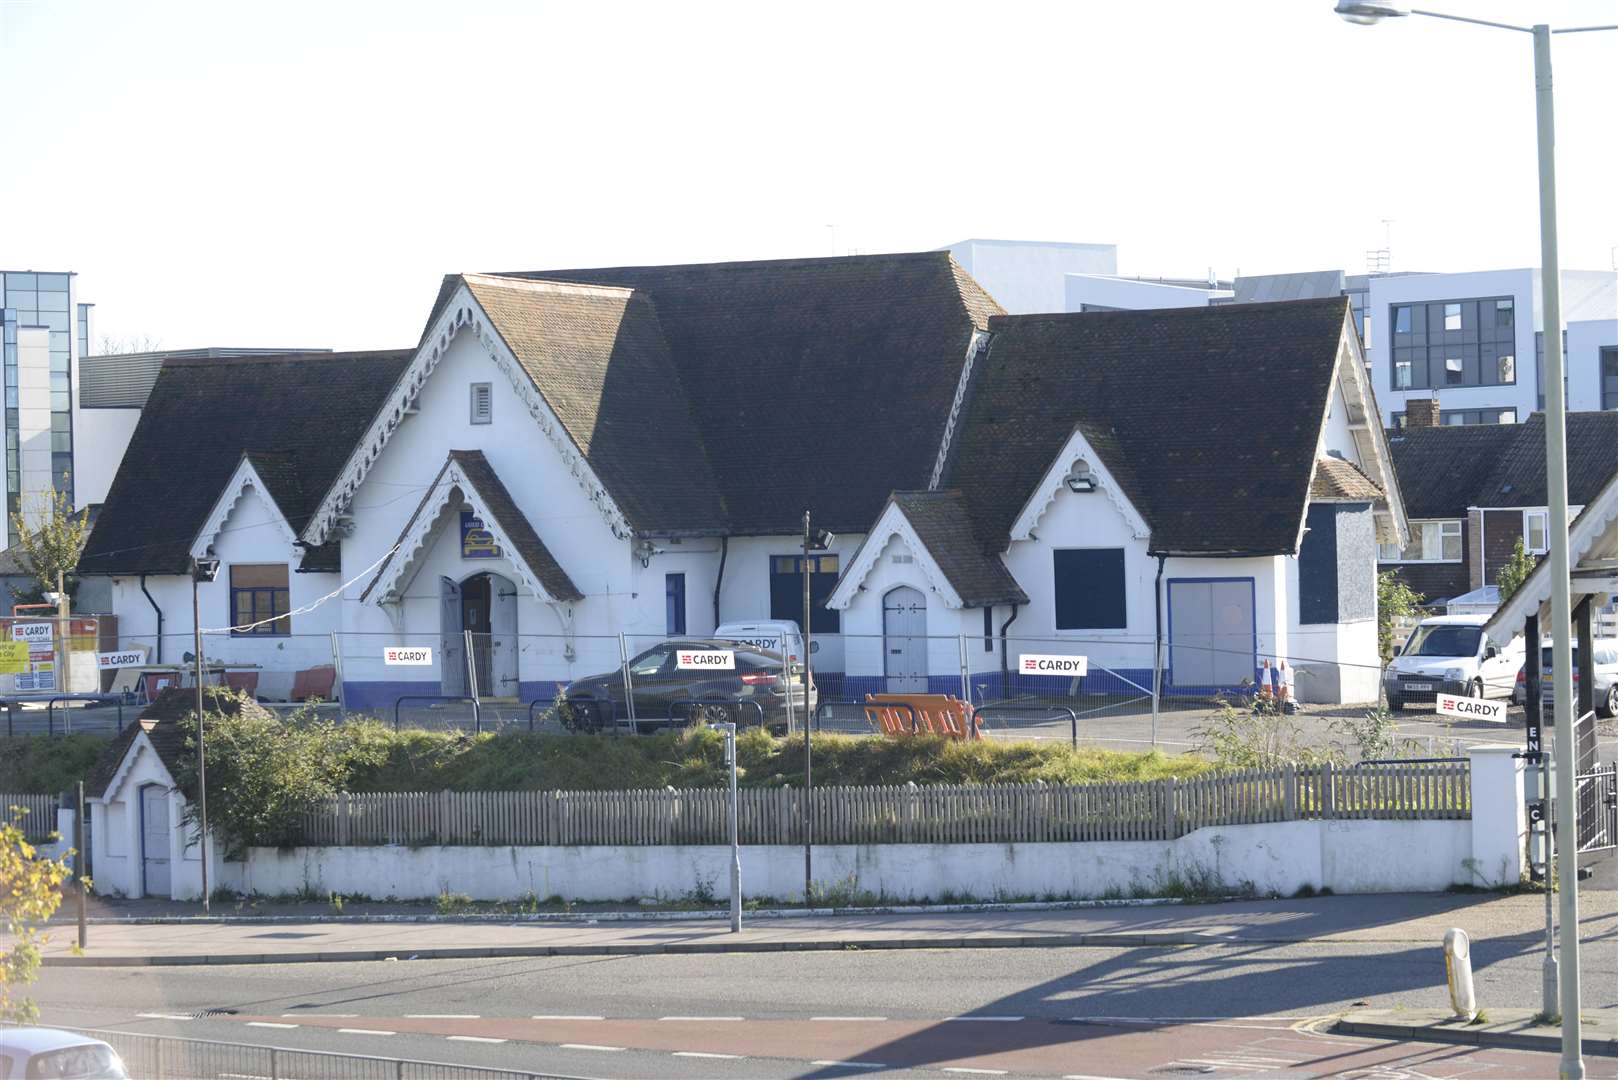 The site on Canterbury's ring-road was previously occupied by the former St Mary Bredin School